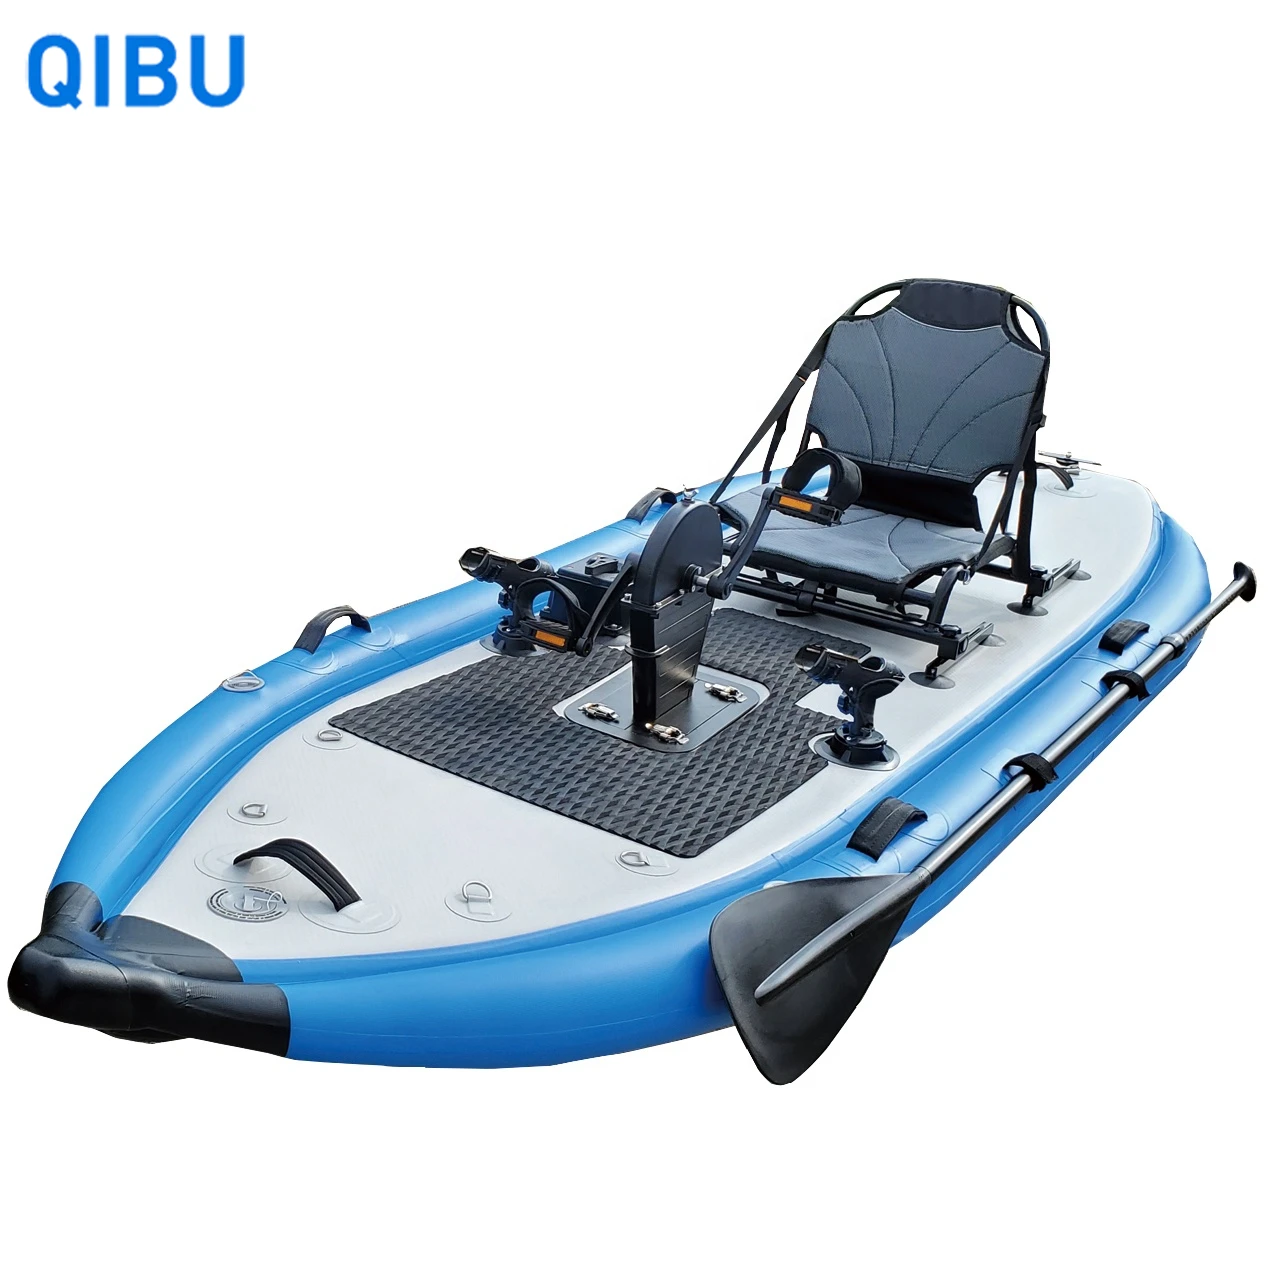 

QIBU PHT-02 Latest Inflatable Boat Kayak Cheap freight Ready to ship sit on top fishing kayak for sale, Multi colors for choices